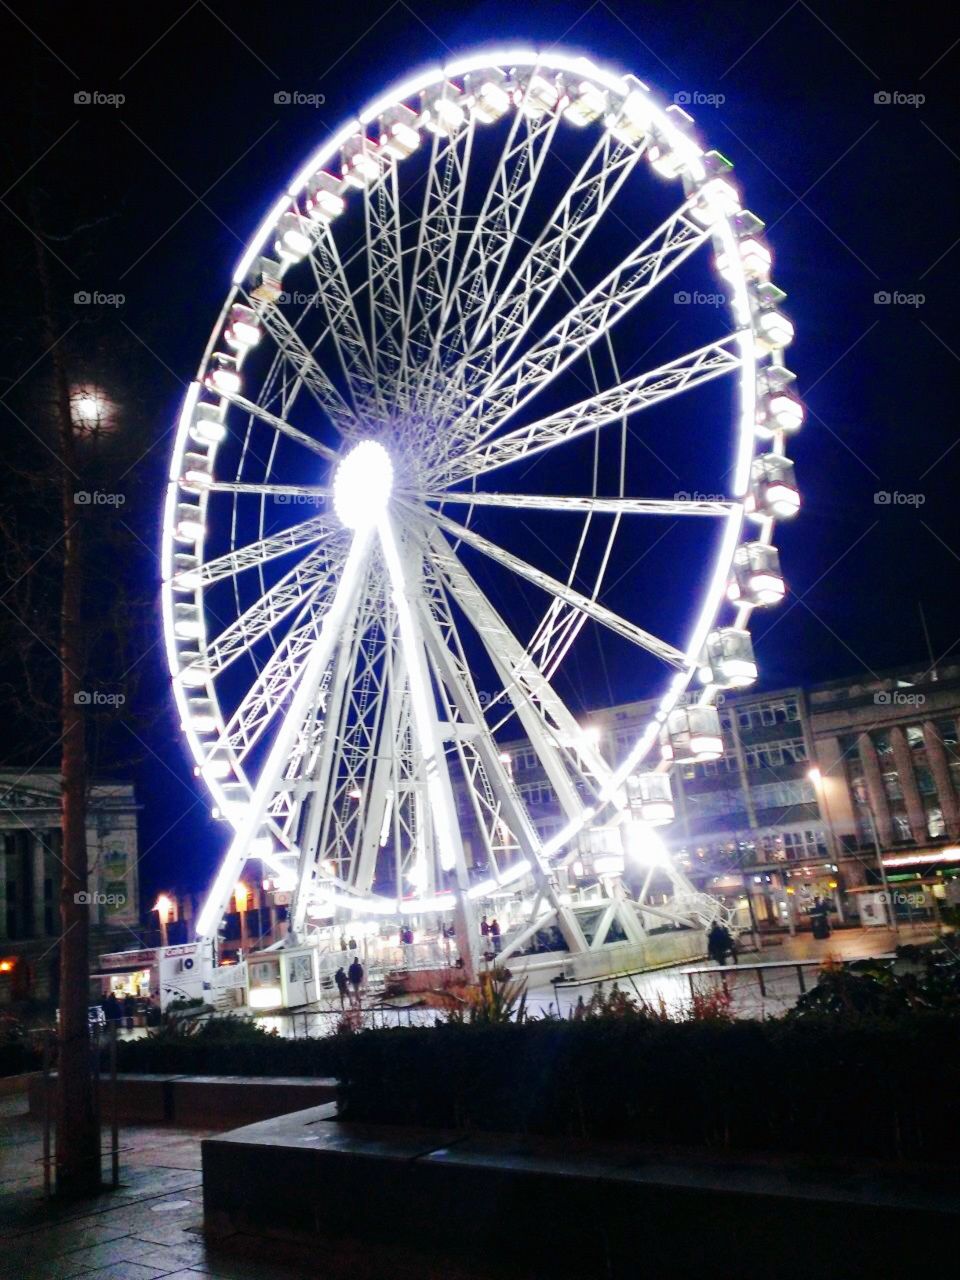 Ferris wheel nottingham. This is a Ferris wheel in Nottingham market square at night time